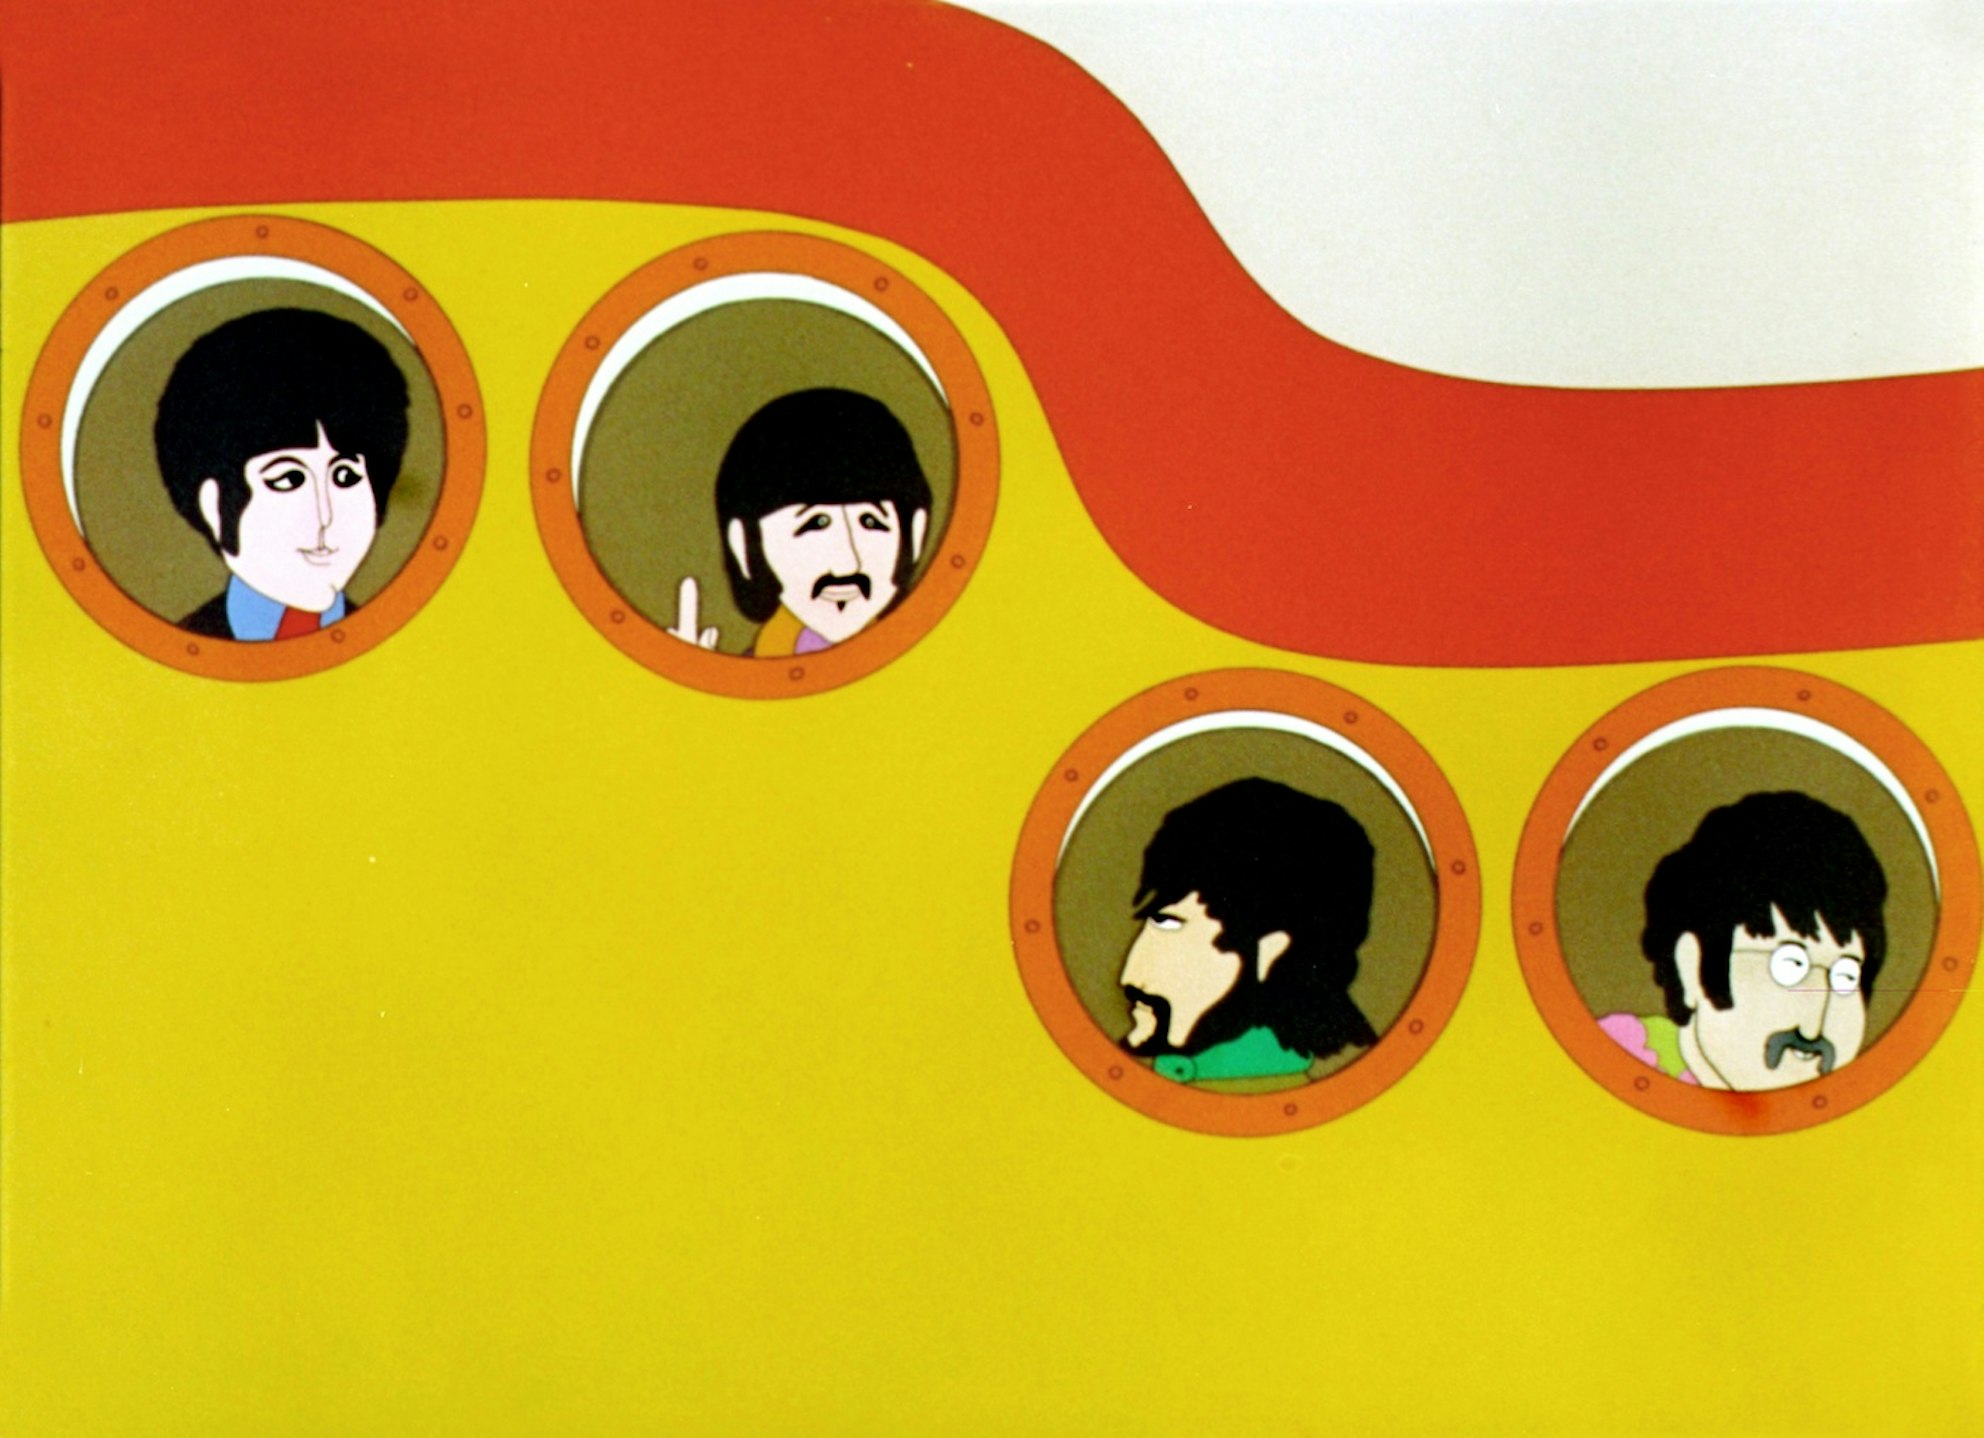 Does Yellow Submarine Provide Hope for Mankind? | www.splicetoday.com